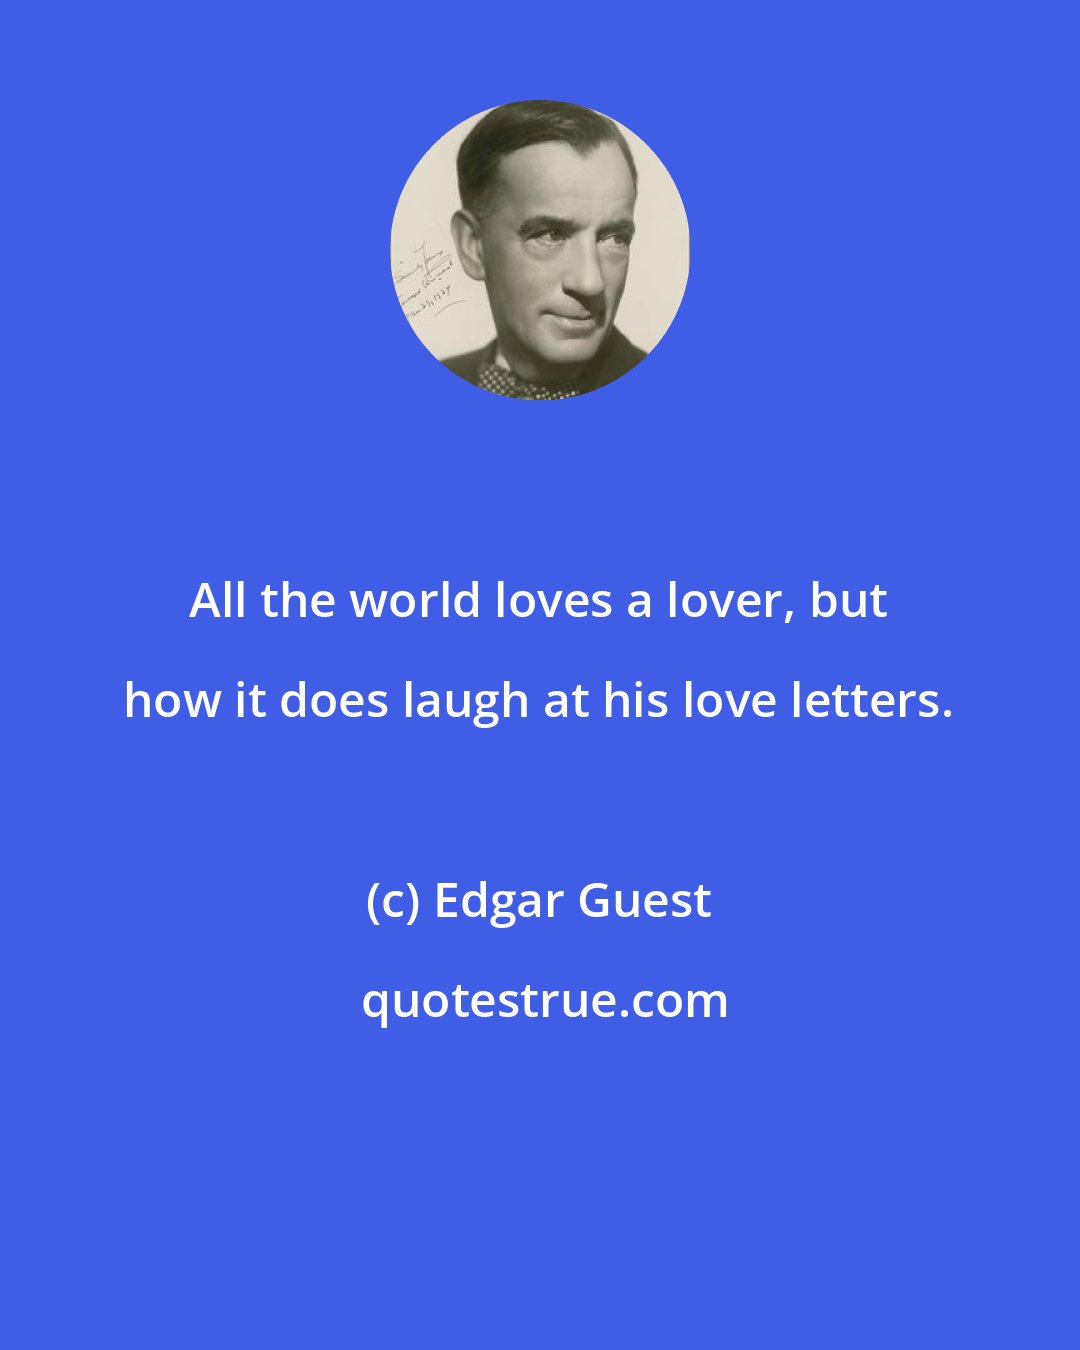 Edgar Guest: All the world loves a lover, but how it does laugh at his love letters.